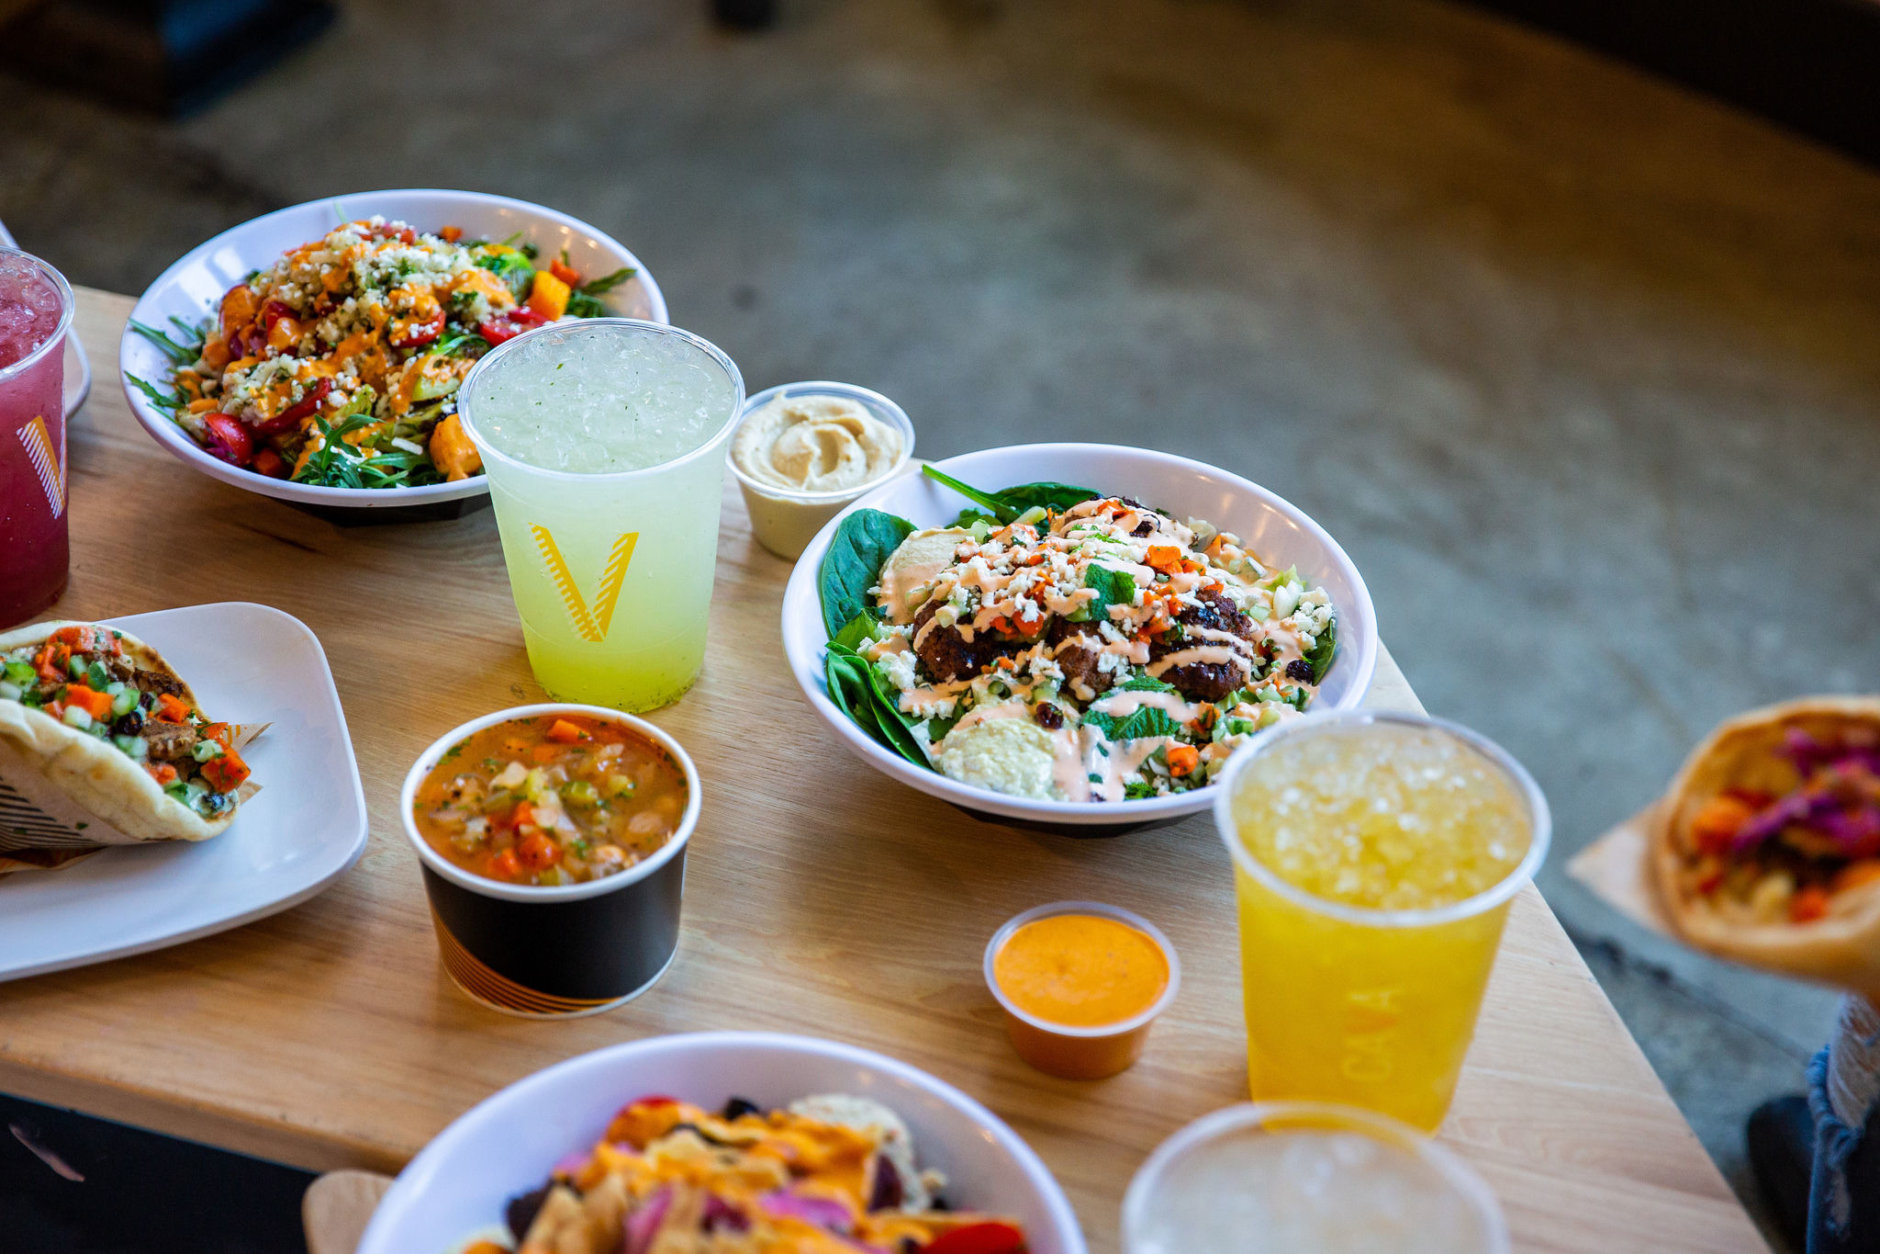 When Cava's newest restaurant opens at Pike 7 Plaza it will be Cava’s 69th restaurant nationally and its 23rd location in Virginia. (Courtesy Cava)